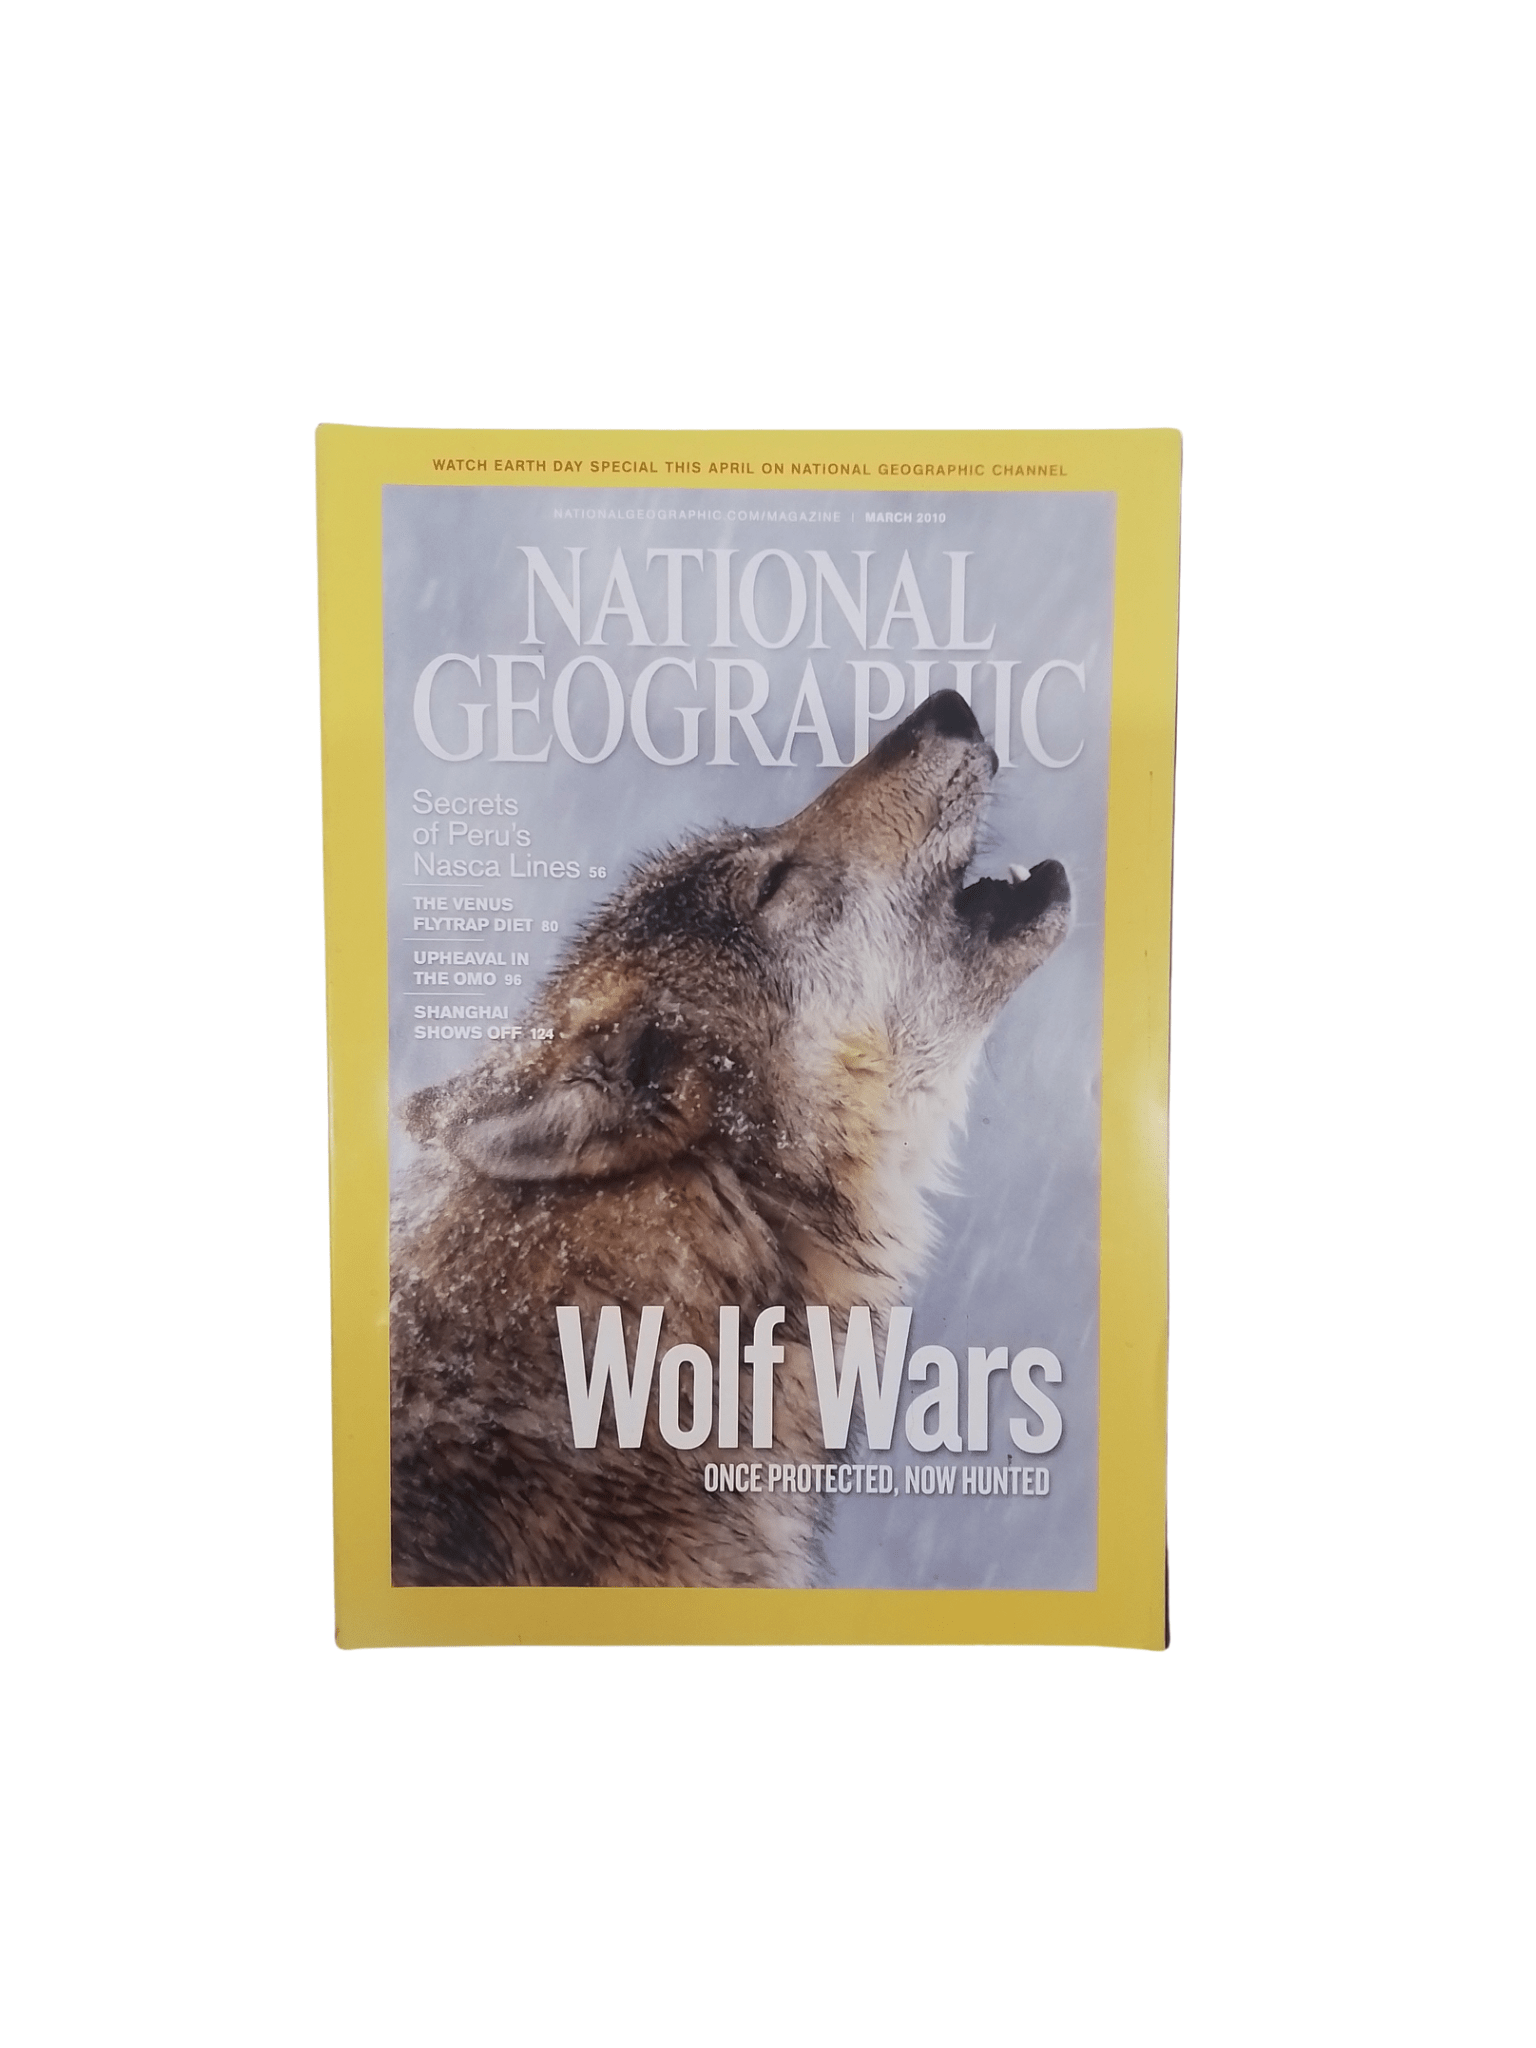 Vintage National Geographic March 2010 - Mu Shop